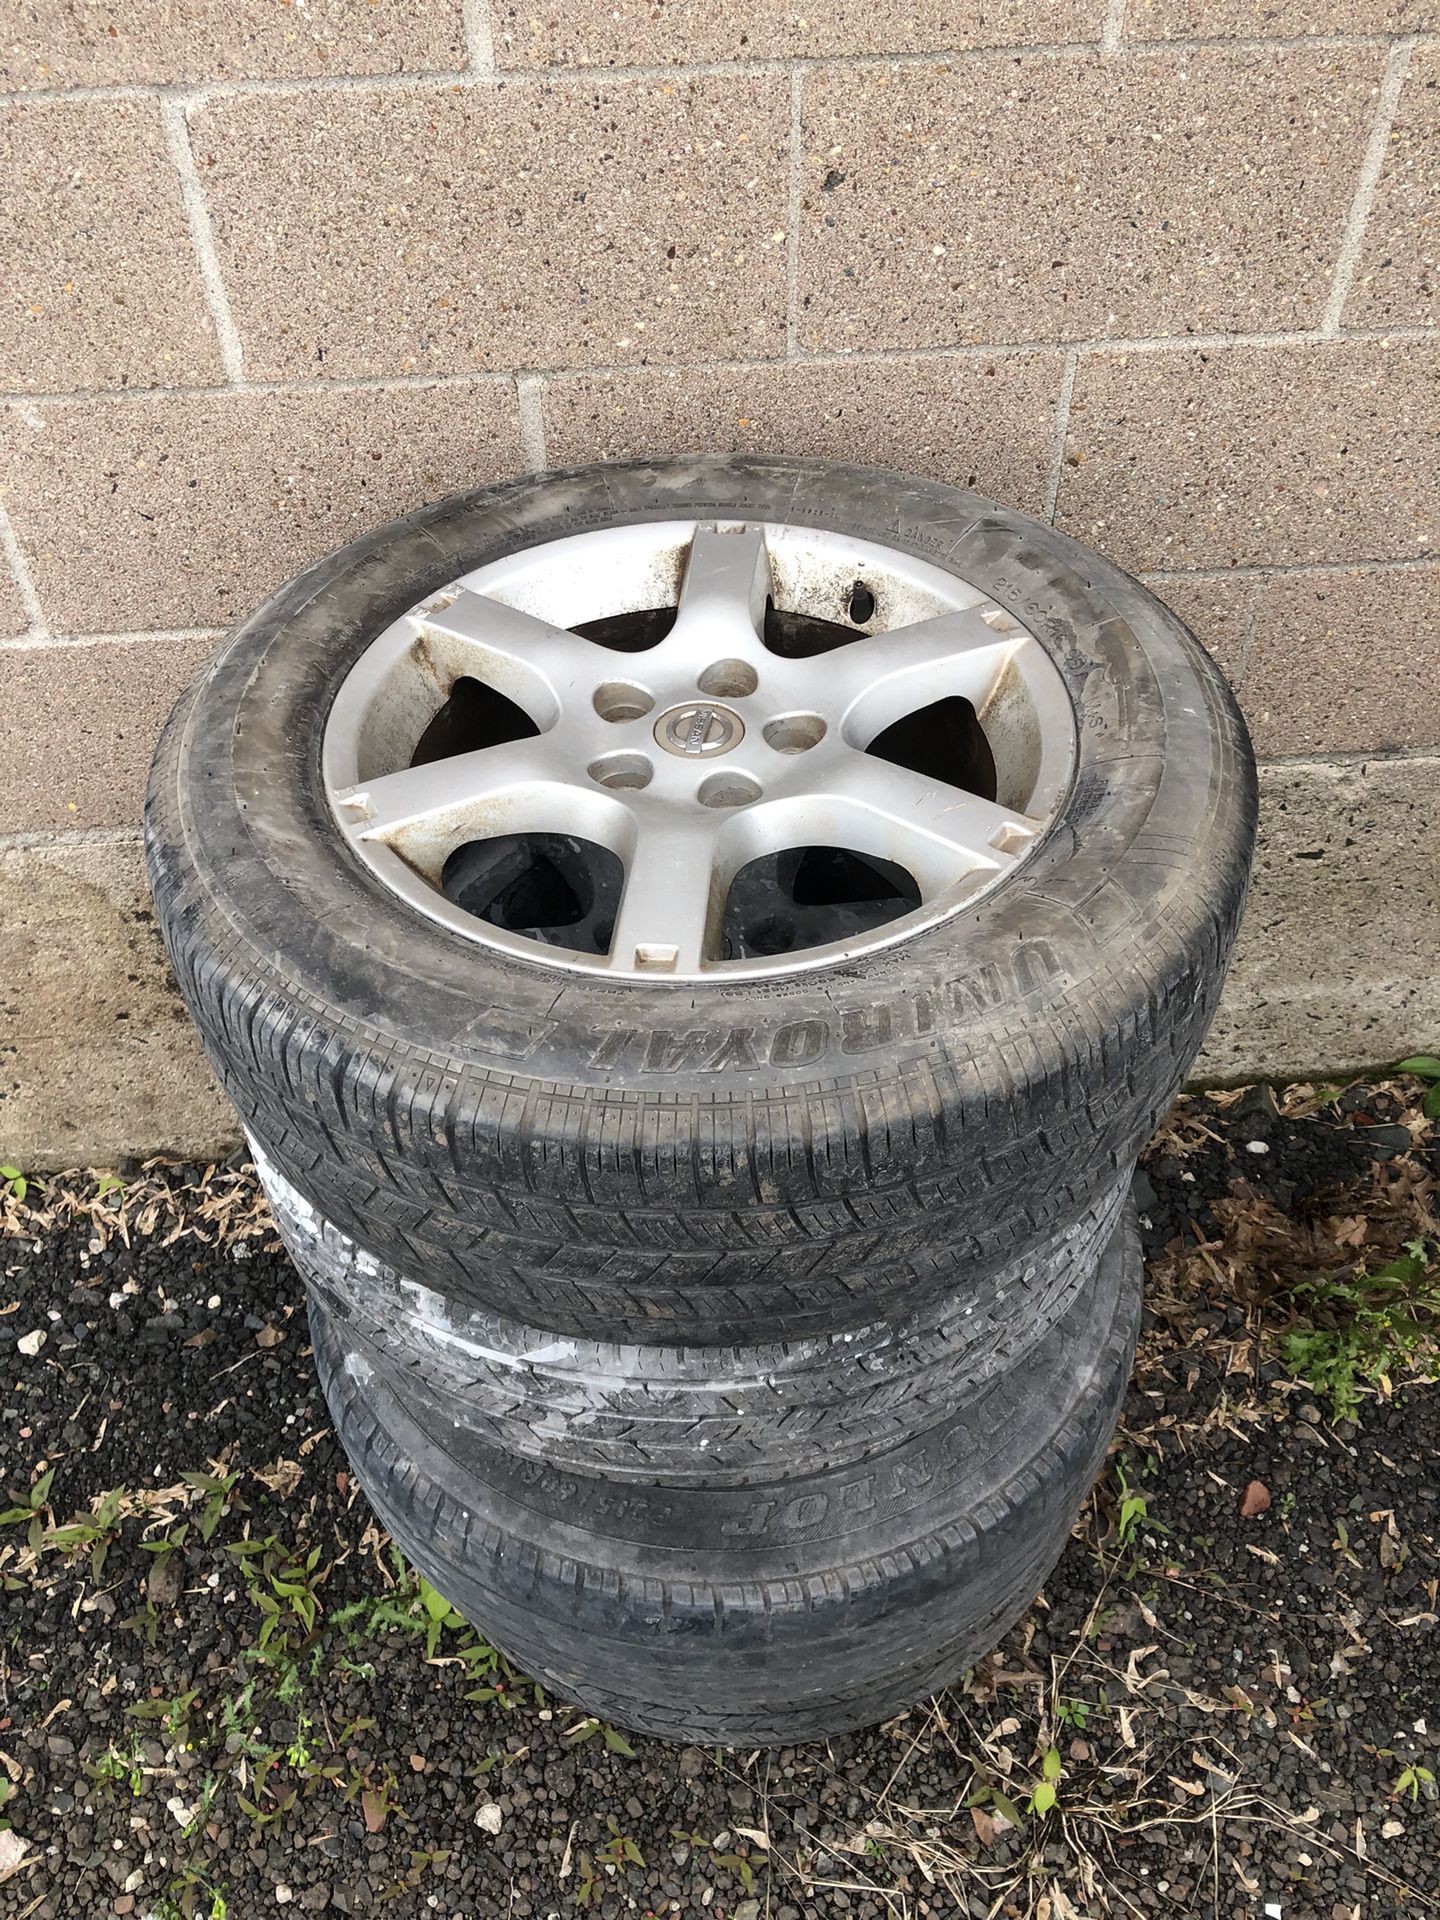 2005 Nissan Altima Wheels And Tires 